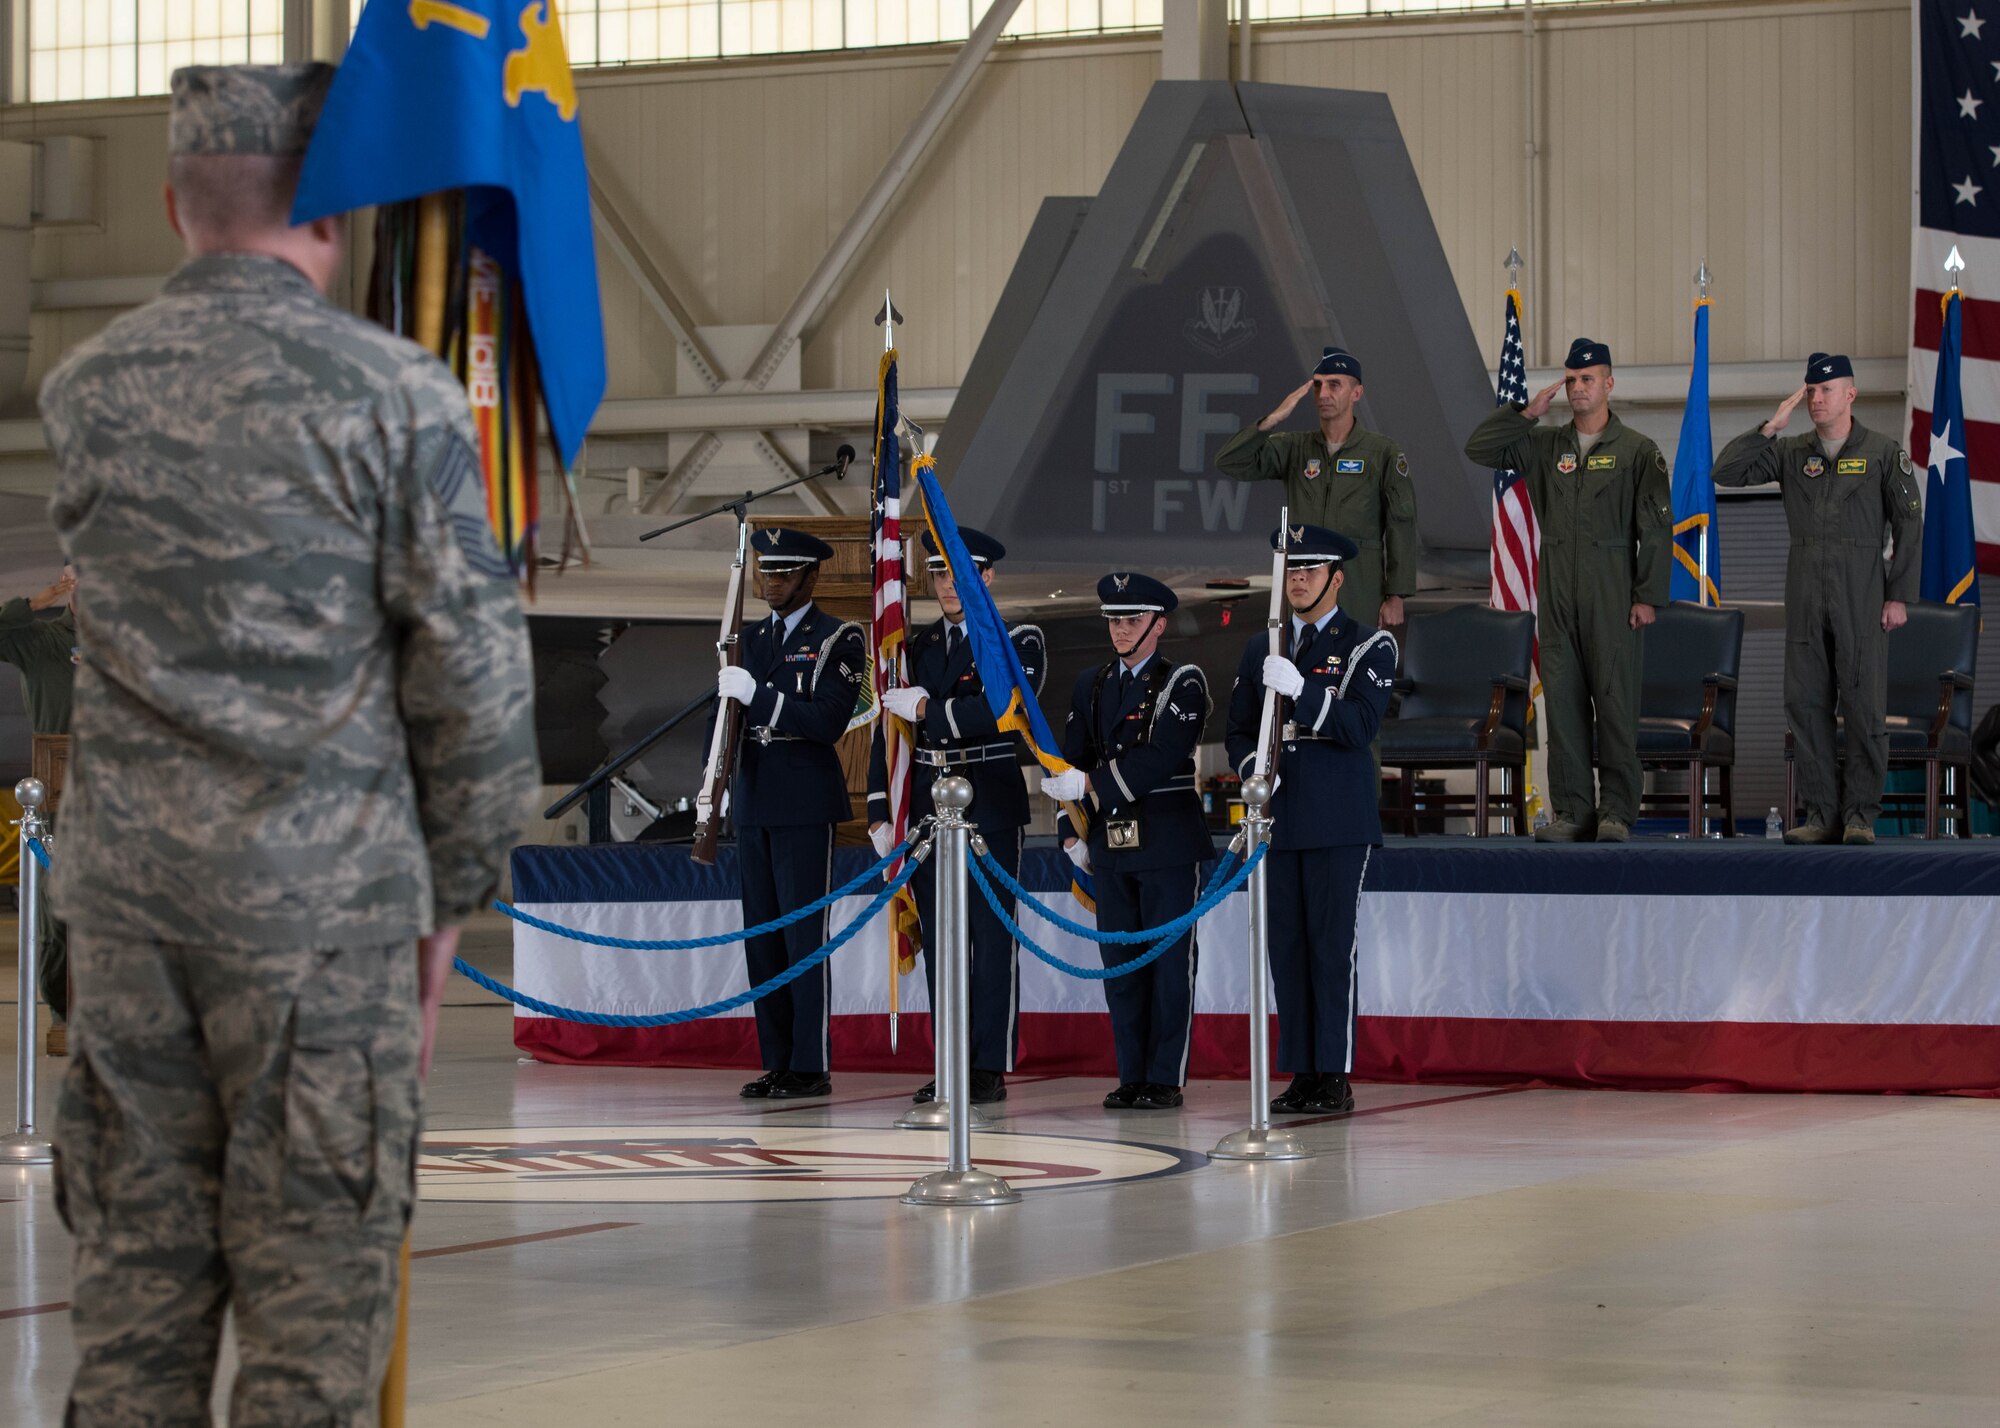 Langley Air Force Base Honor Guard members present the colors during the 1st Fighter Wing change of command ceremony at Joint Base Langley-Eustis, Va., June 23, 2017. U.S. Air Force Col. Peter Fesler relinquished command to U.S. Air Force Col. Jason Hinds after two years of service. (U.S. Air Force photo/Staff Sgt. J.D. Strong II) 